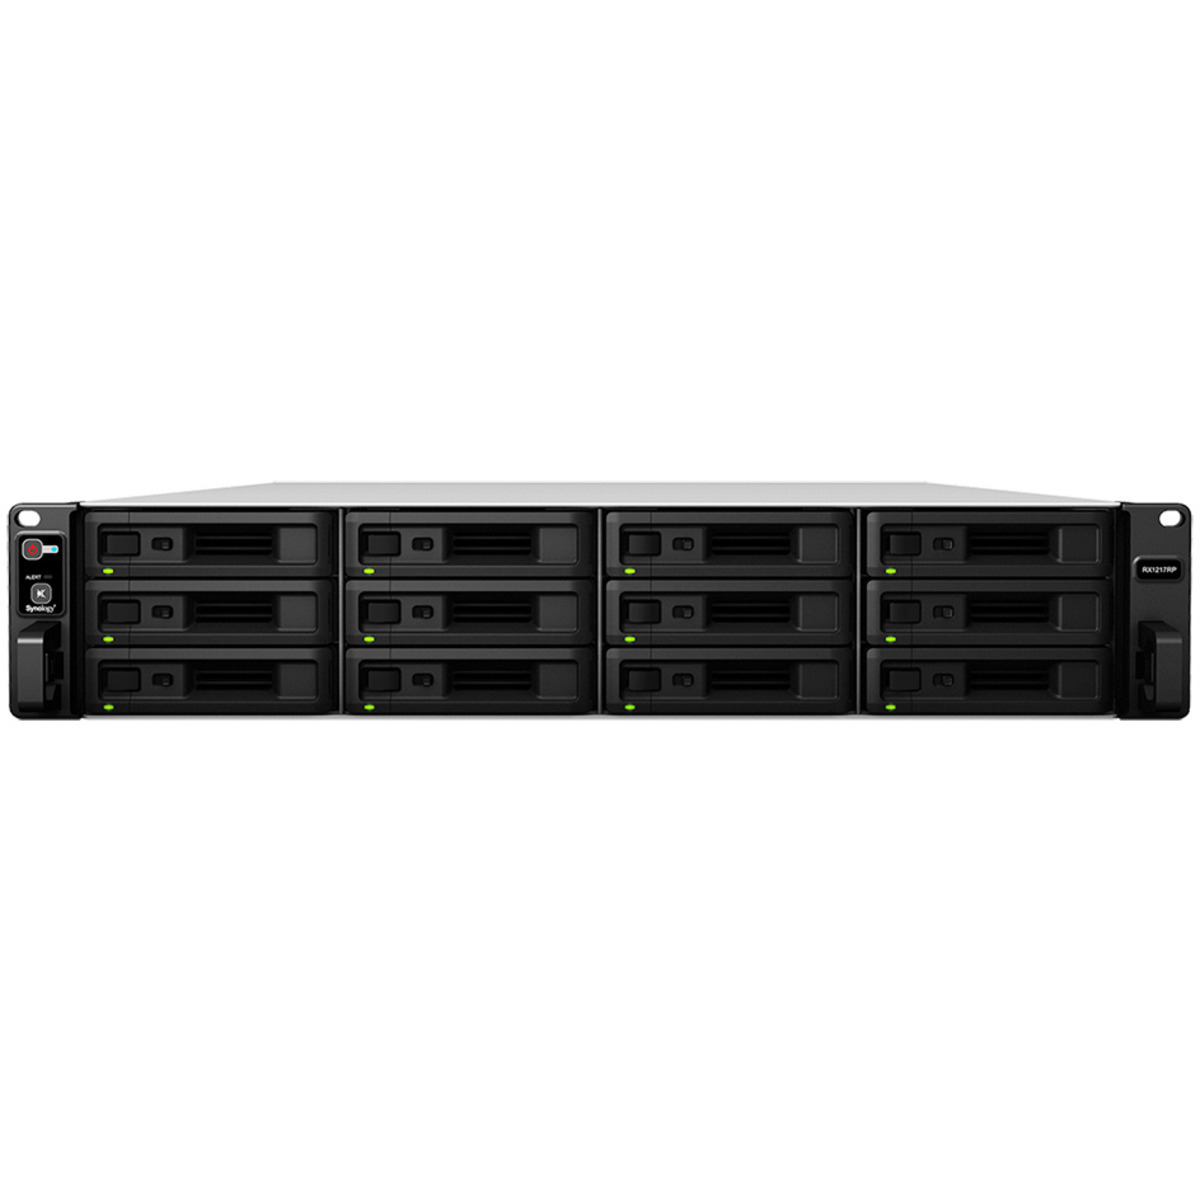 buy $4570 Synology RX1217 96tb RackMount Expansion Enclosure 12x8000gb Western Digital Ultrastar DC HC320 HUS728T8TALE6L4 3.5 7200rpm SATA 6Gb/s HDD ENTERPRISE Class Drives Installed - Burn-In Tested - nas headquarters buy network attached storage server device das new raid-5 free shipping usa christmas new year holiday sale RX1217